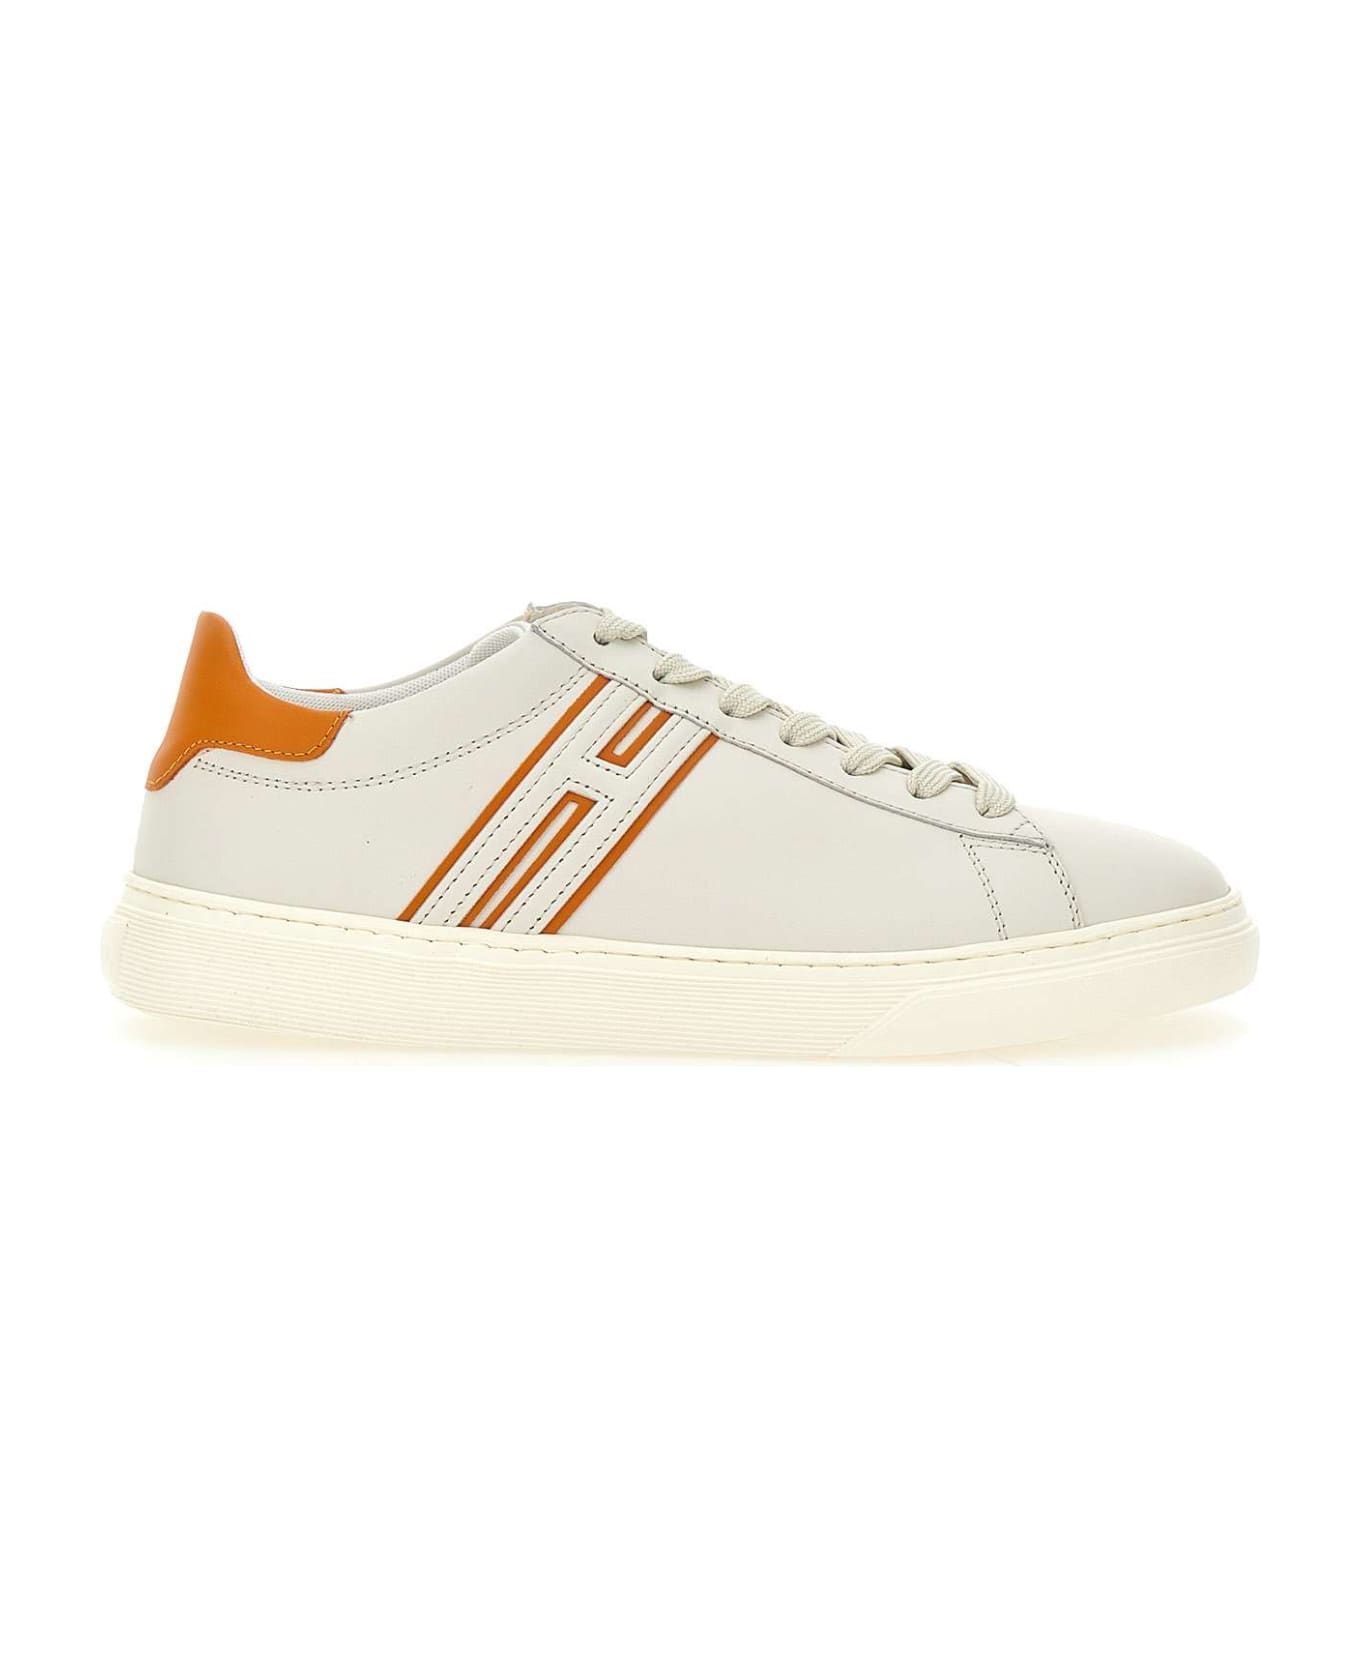 Hogan "h365" Leather Sneakers - WHITE